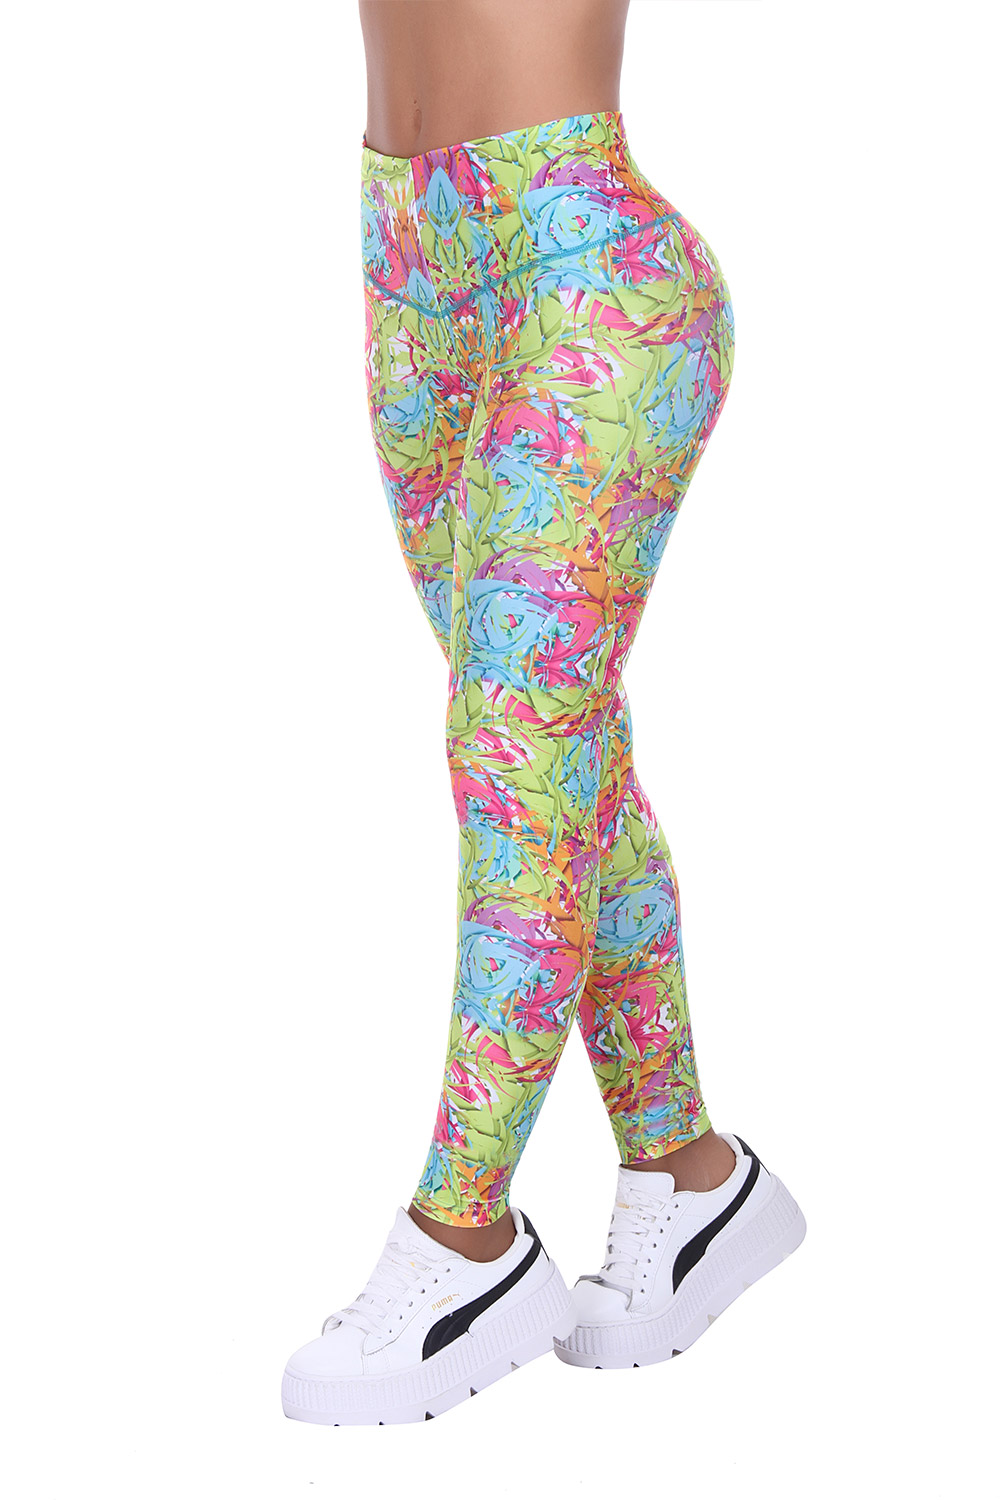 Women’s Black and Hot Pink, Printed Leggings with Slim and Tone Control by Bon Bon – Up